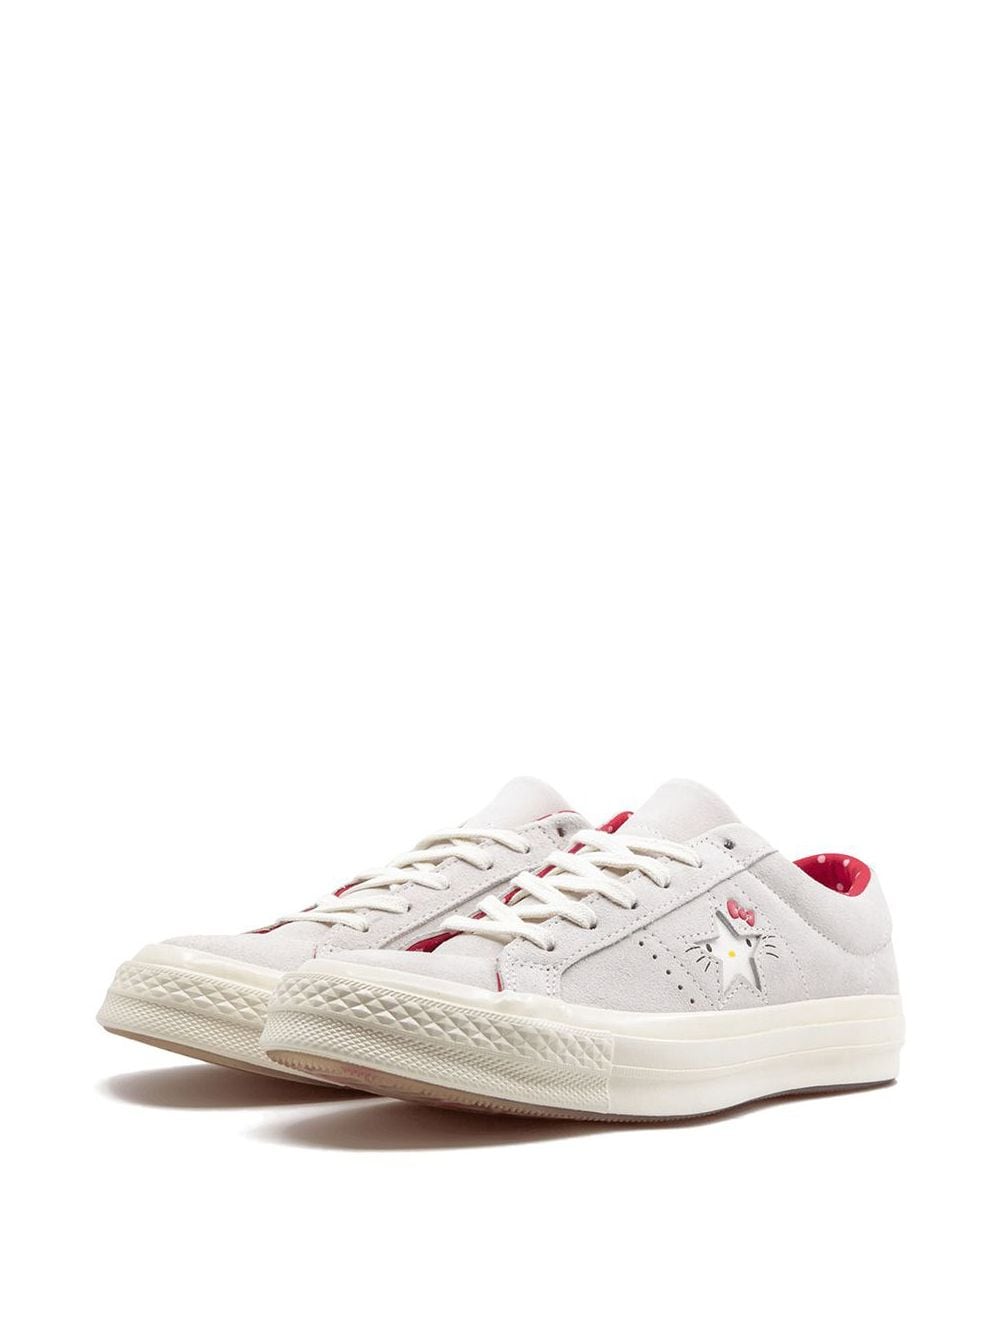 converse x hello kitty one star suede low top